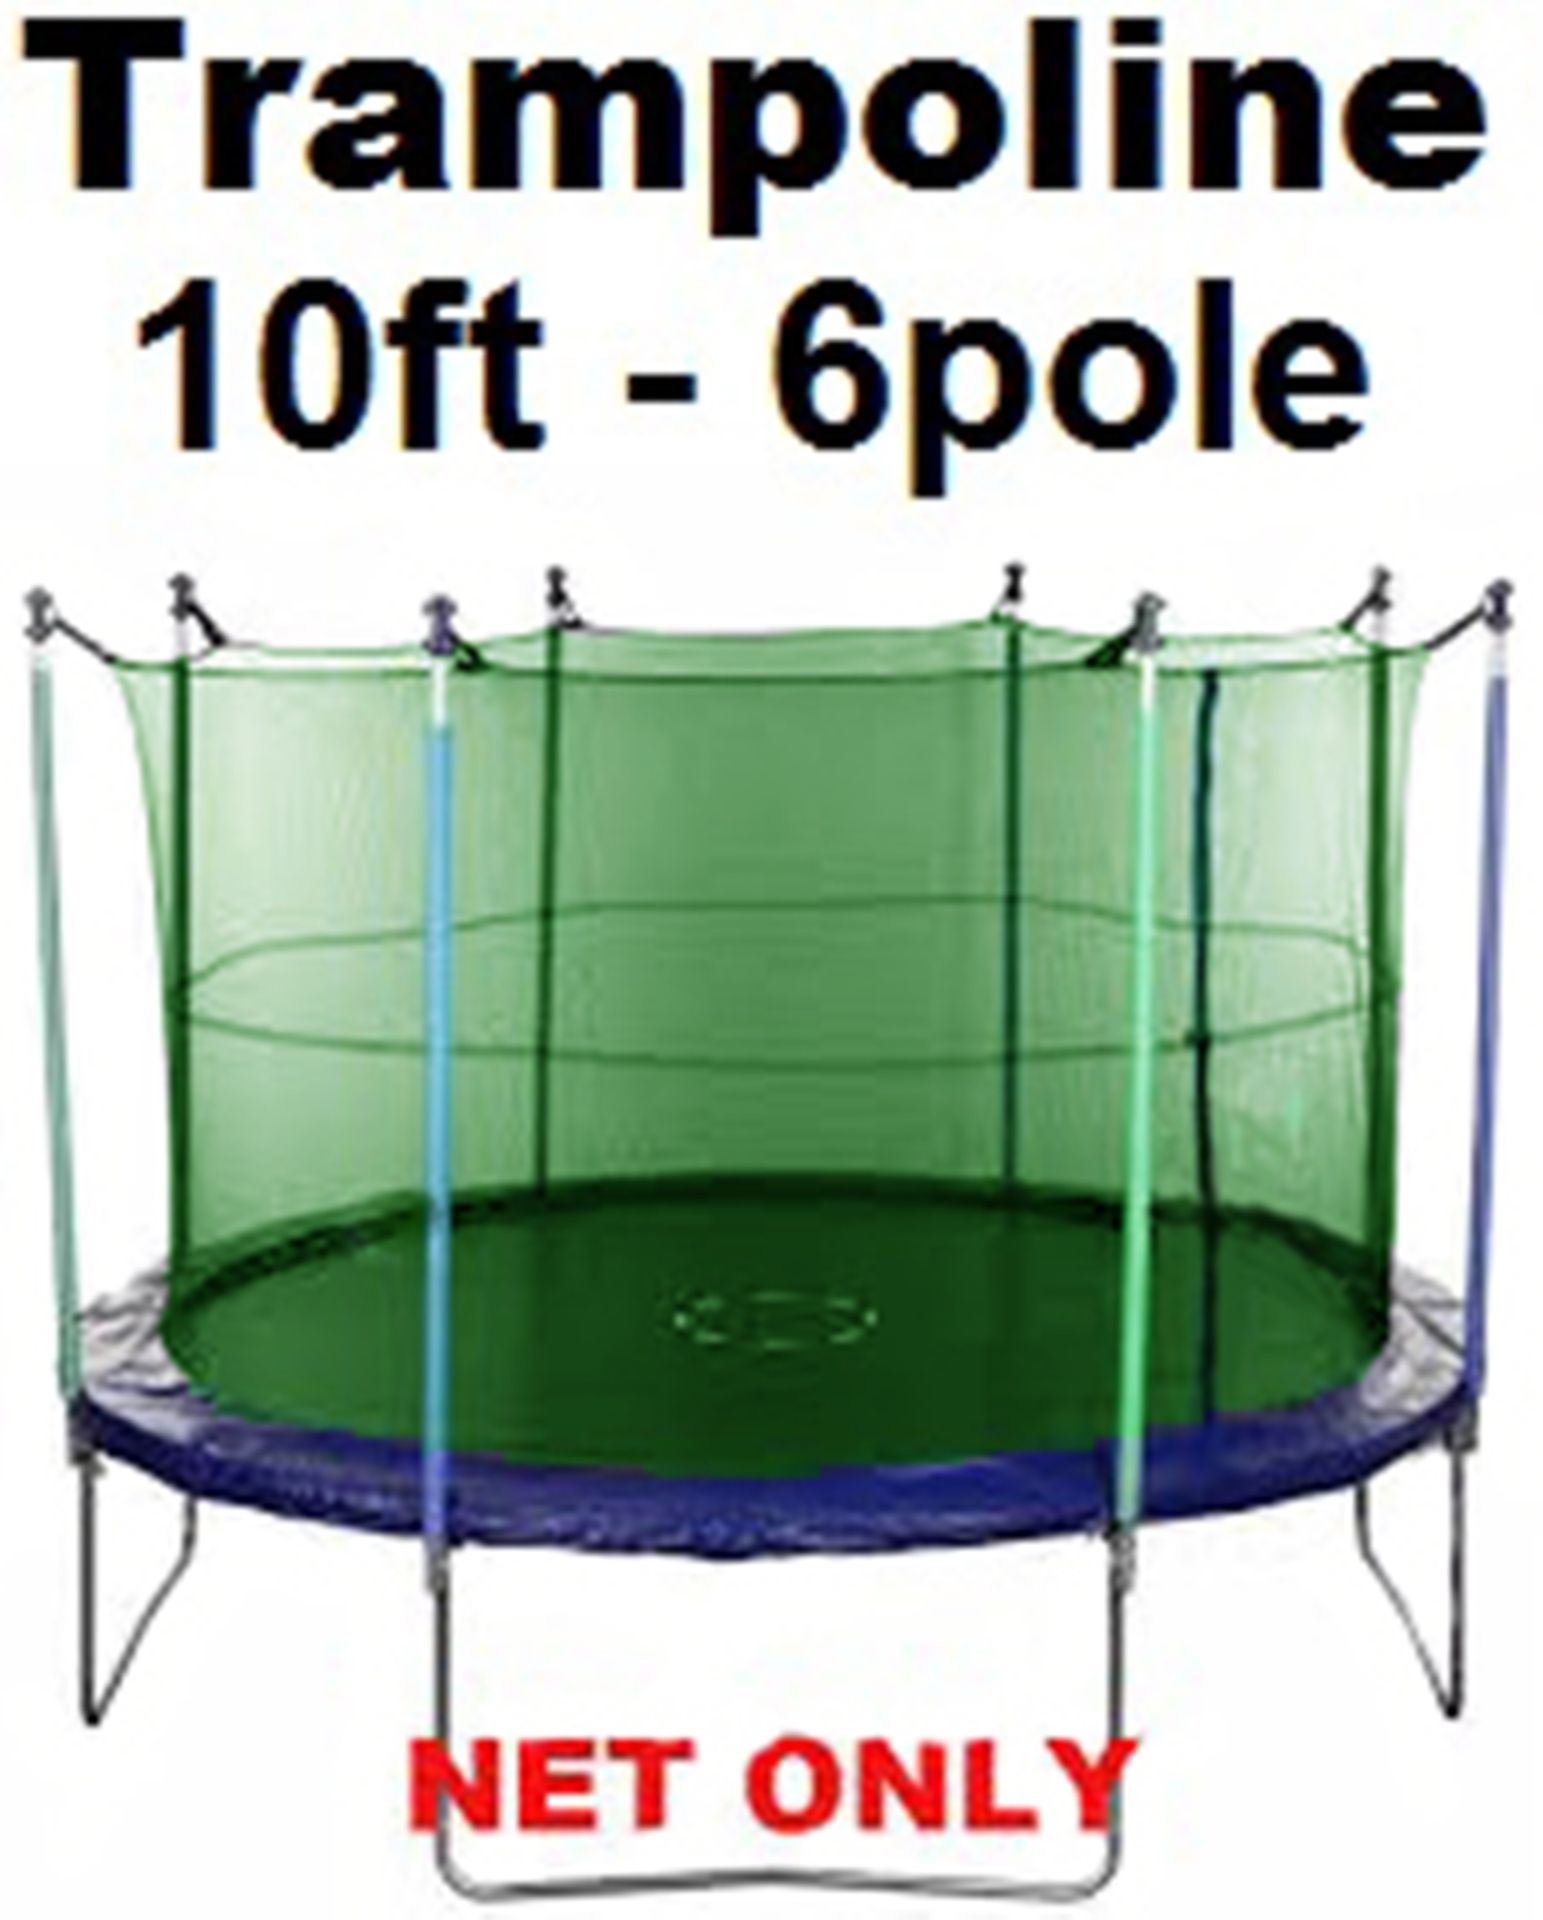 Trampoline replacement net for 10 feet 6 poles in Green colour